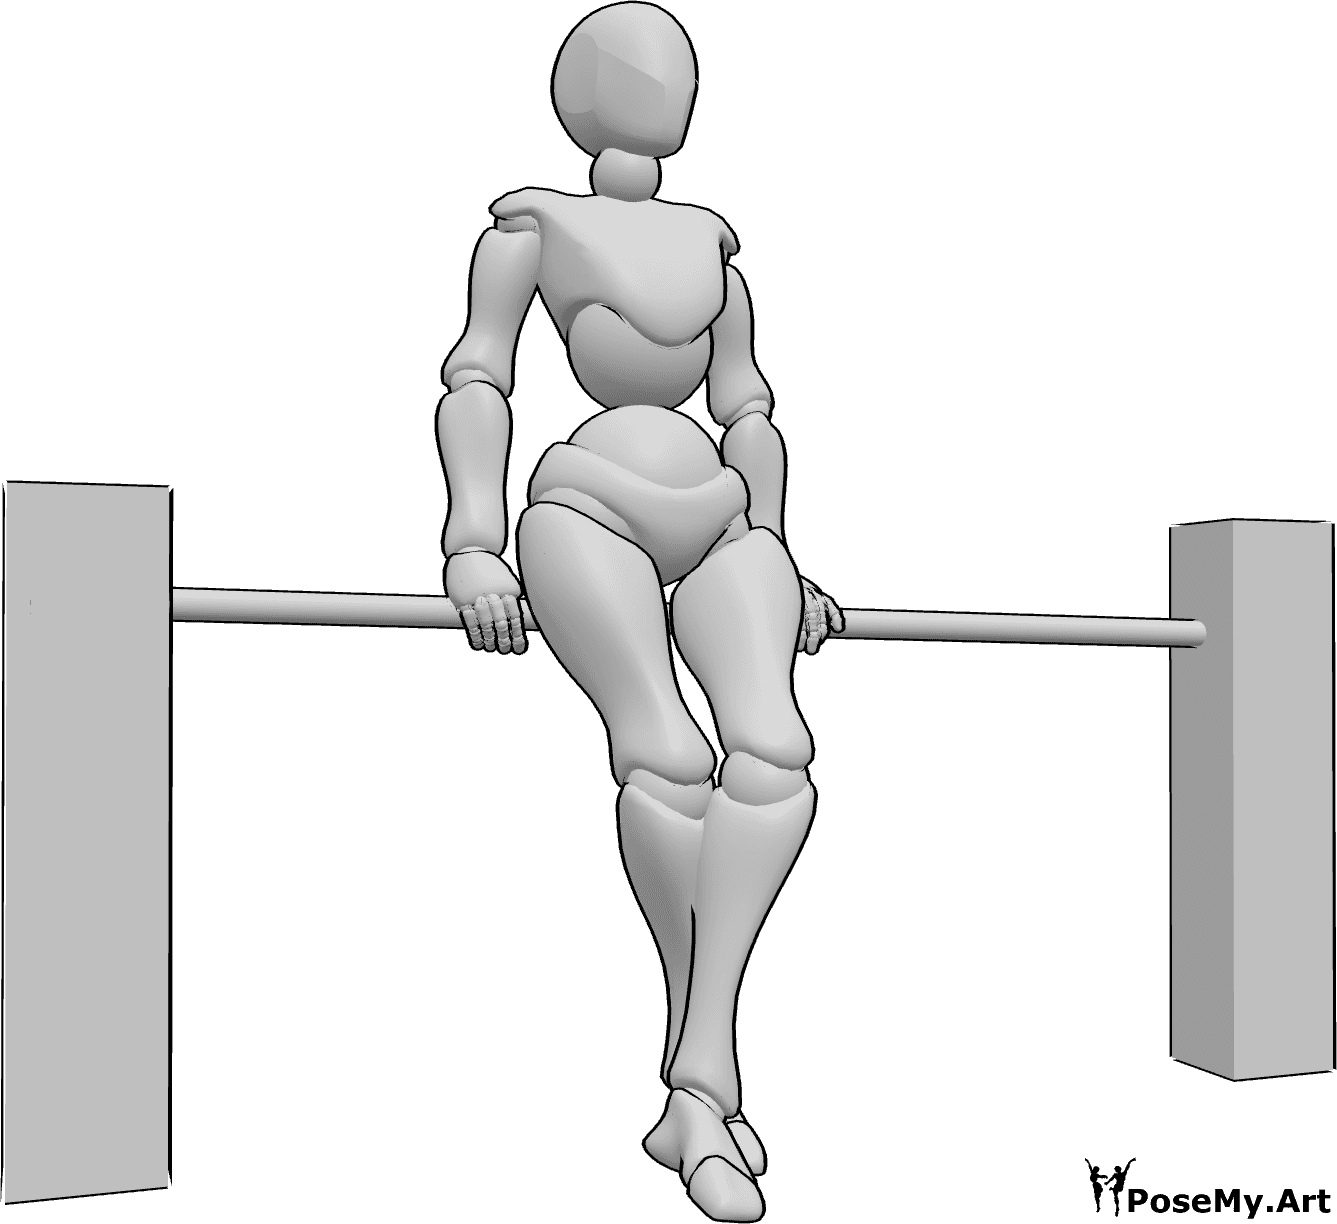 Pose Reference- Standing crossed legs pose - Female is leaning against the railing with her legs crossed